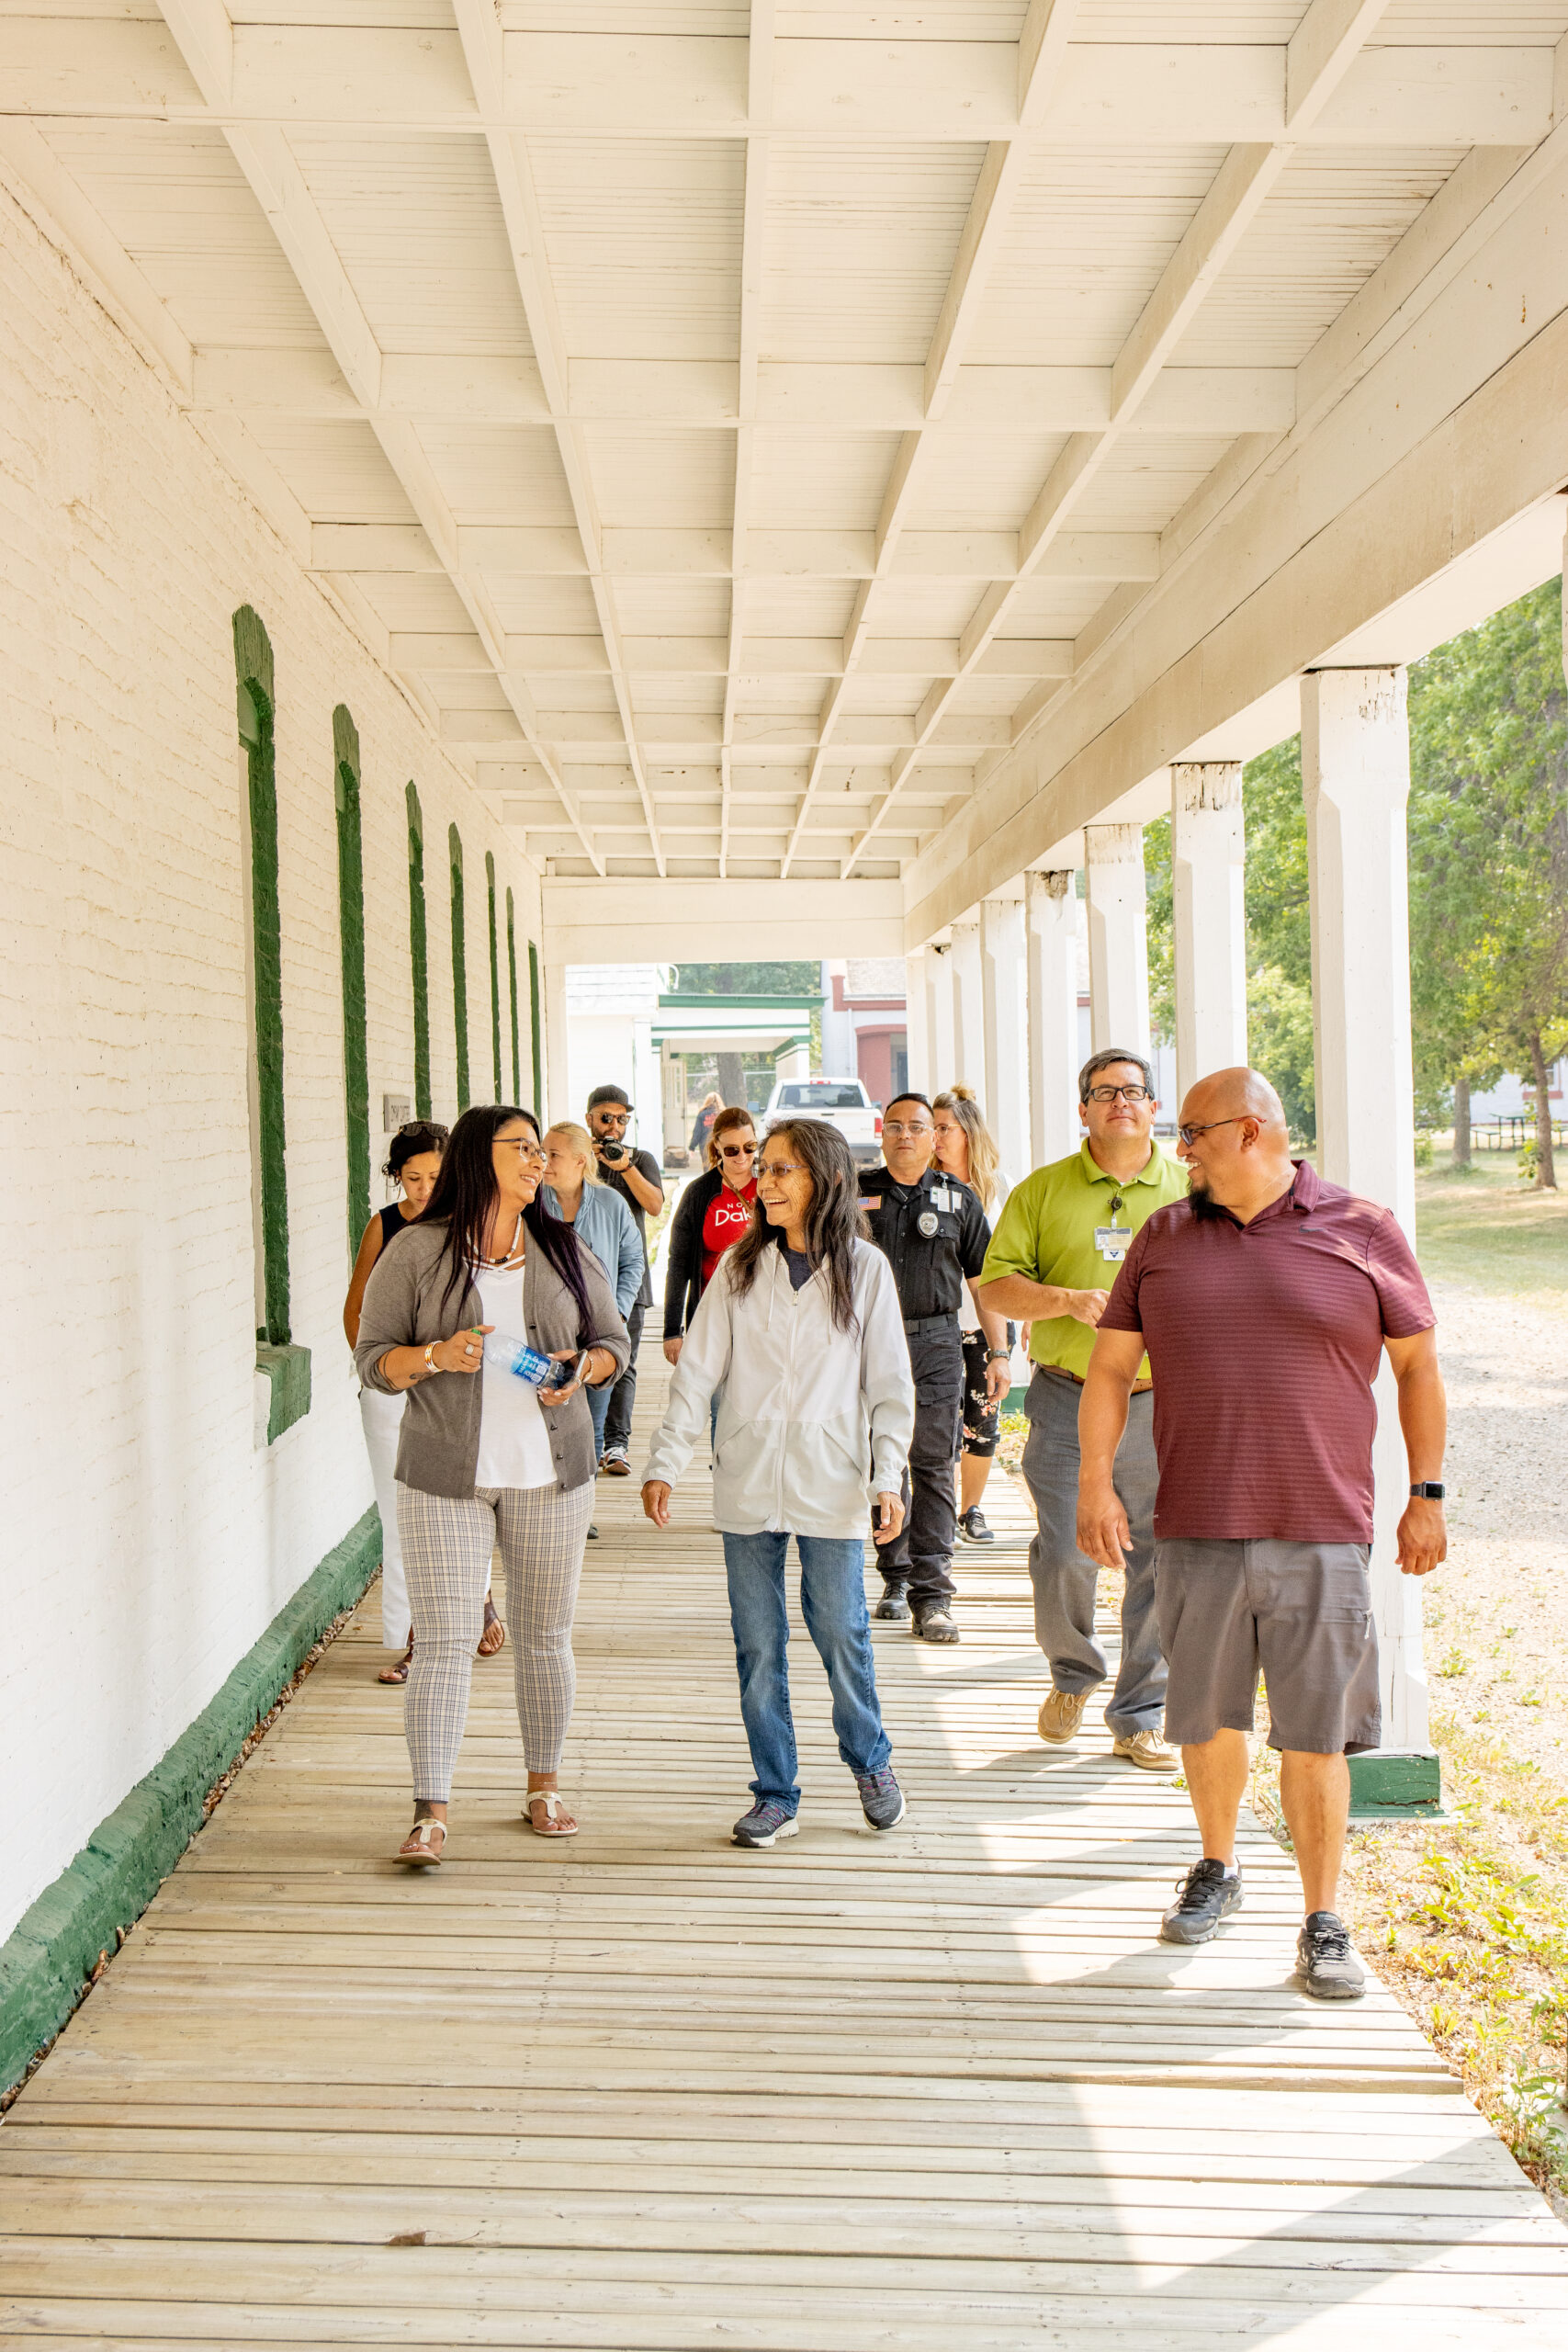 A group of people walking through a covered external corridor of a white building. Some are talking to each other and smiling.